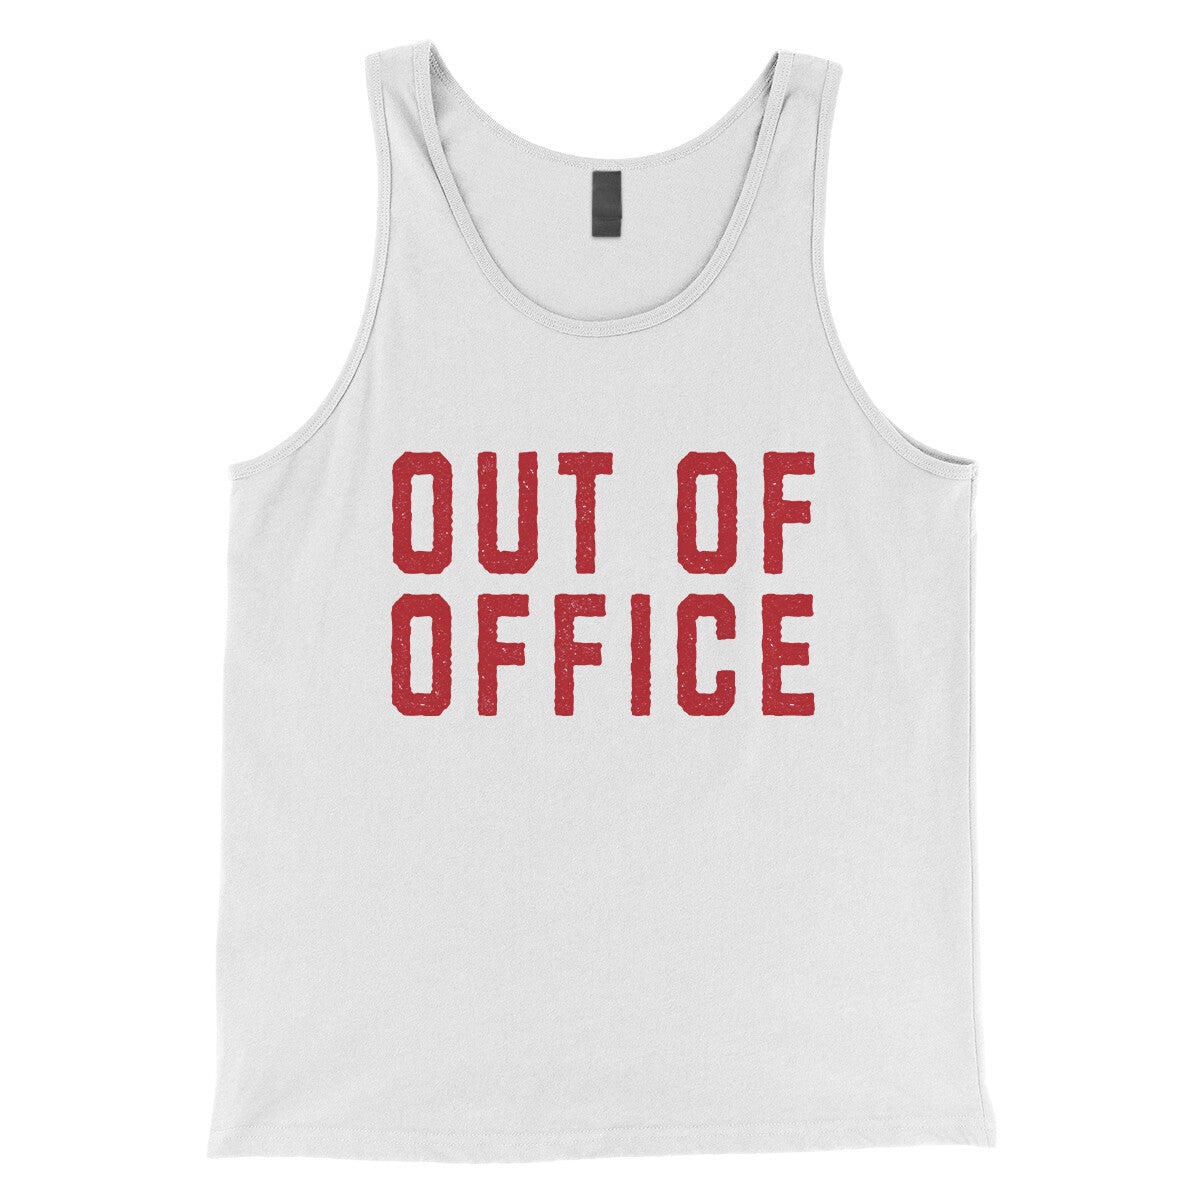 Out of Office in White Color